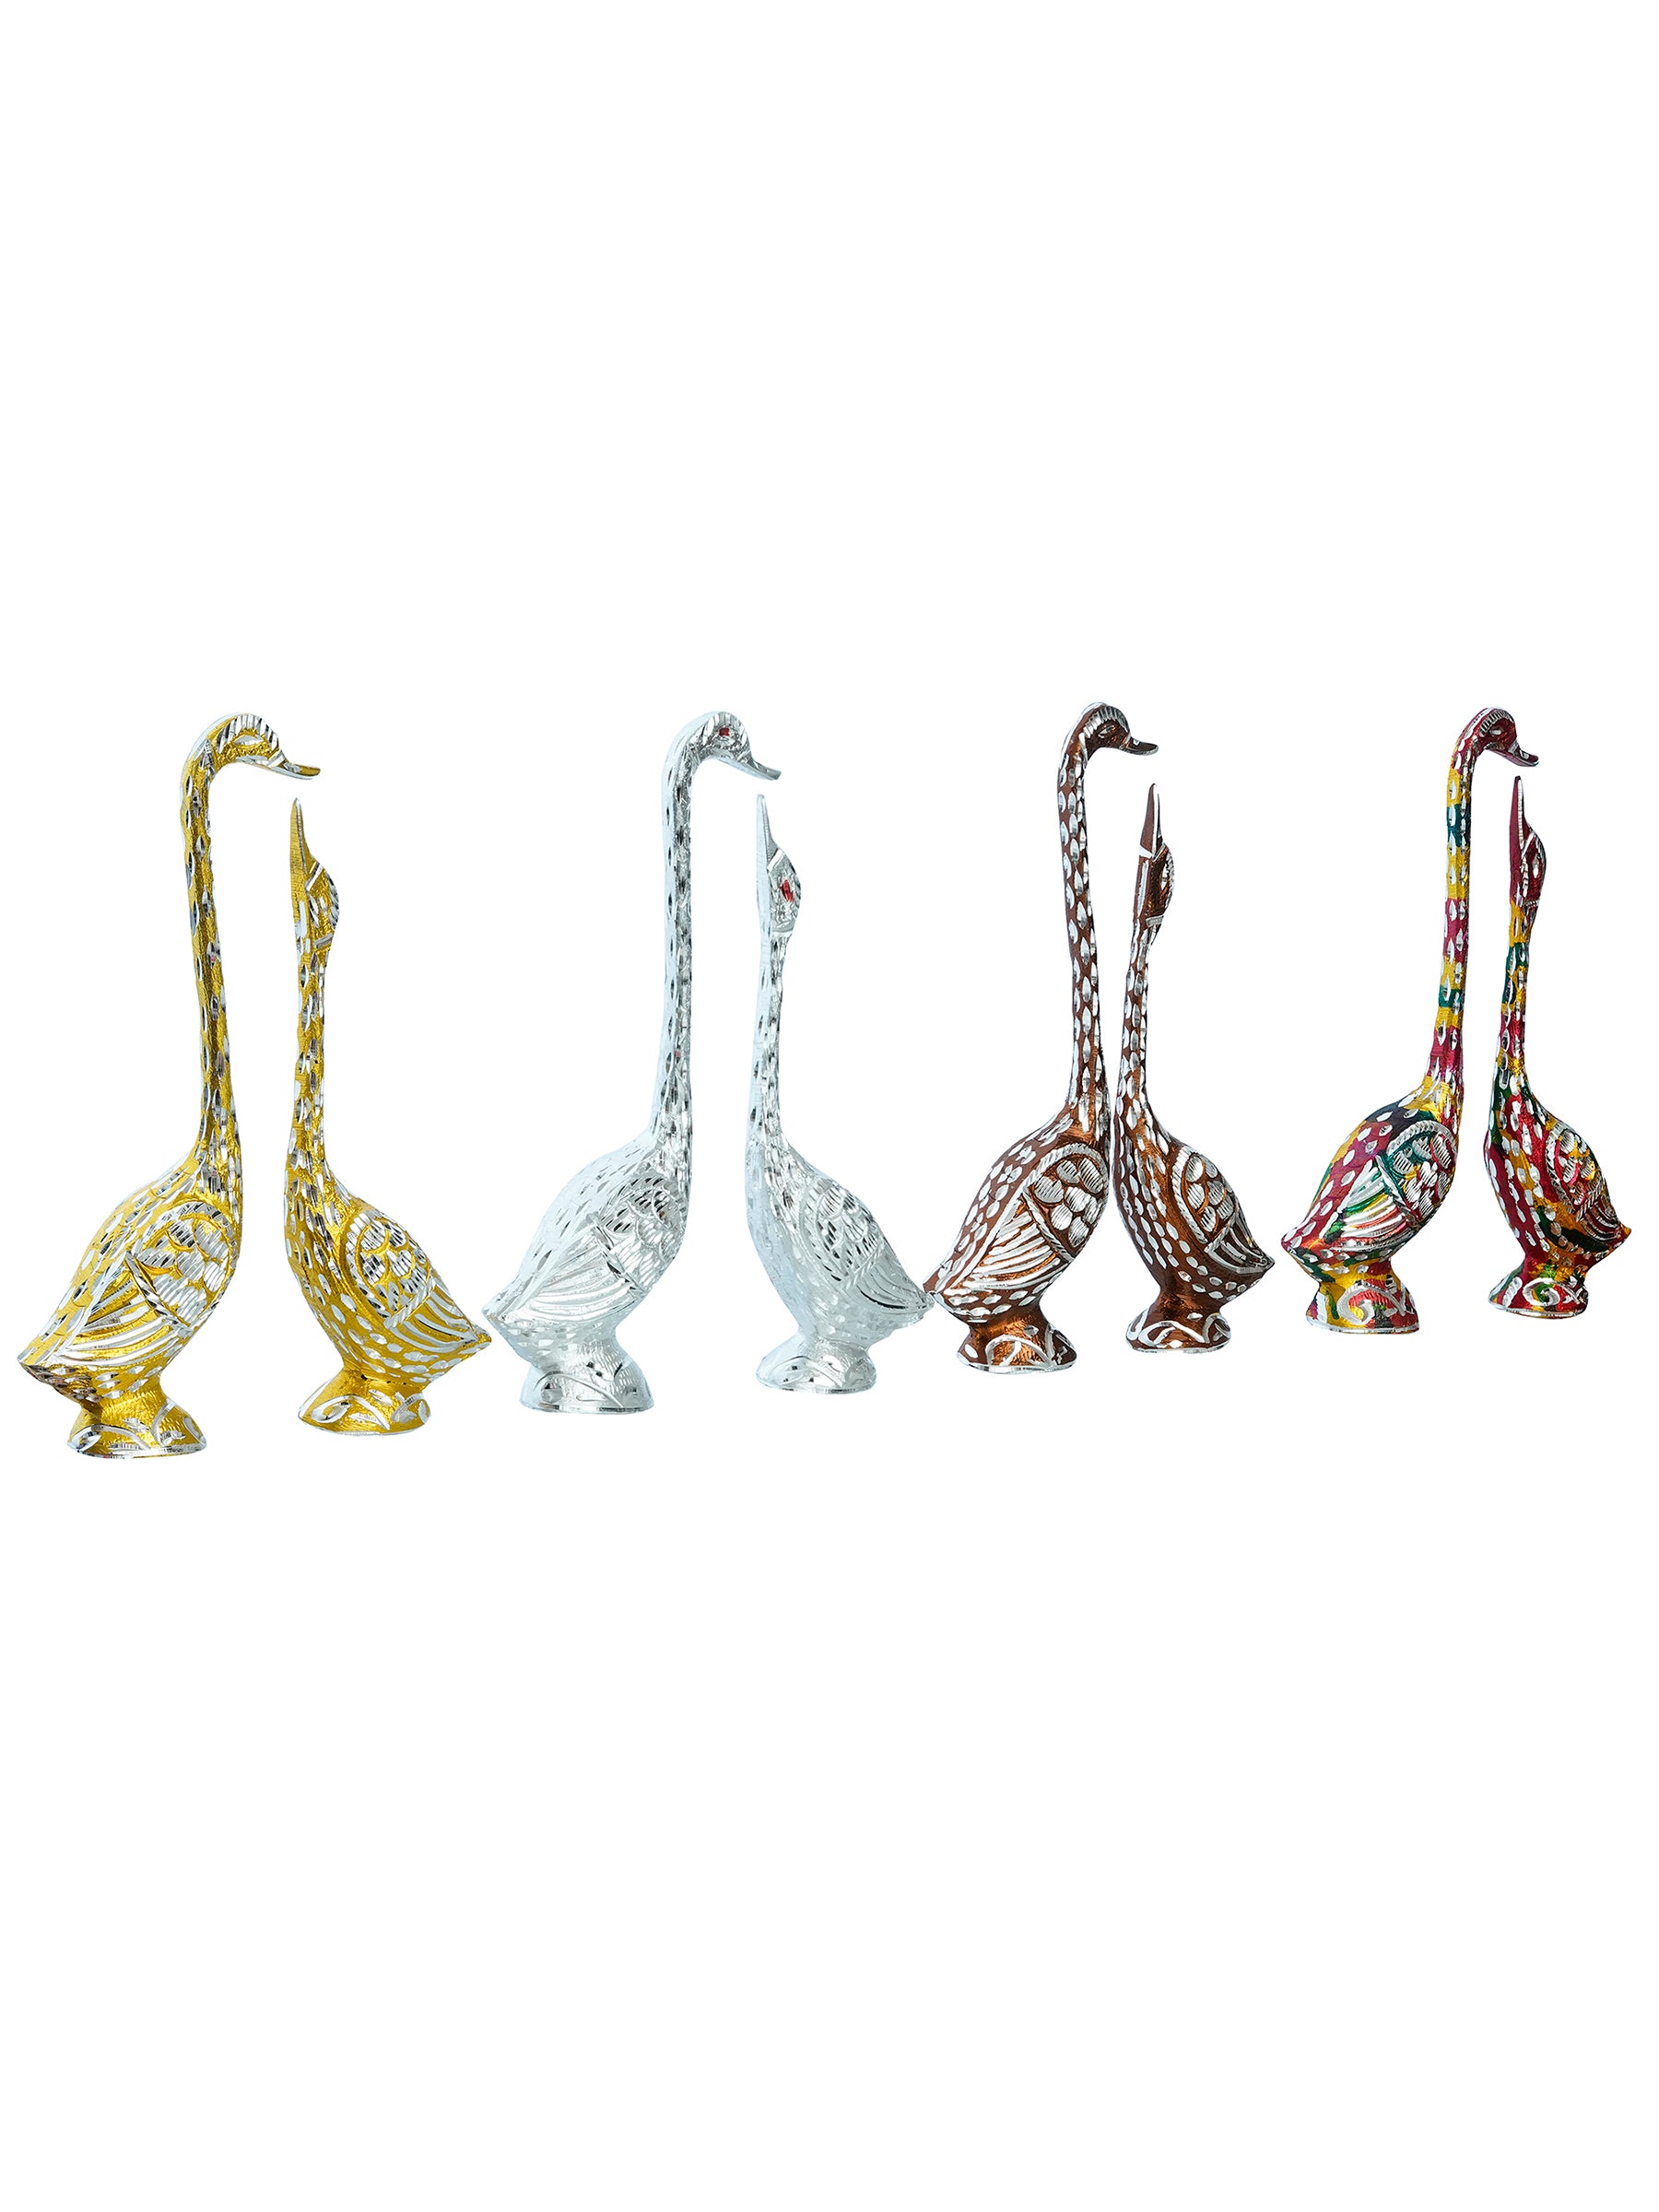 eCraftIndia Set of Four Kissing Swan Couple Handcrafted Decorative showpiece(Colorful, Golden, Silver,Brown) 5